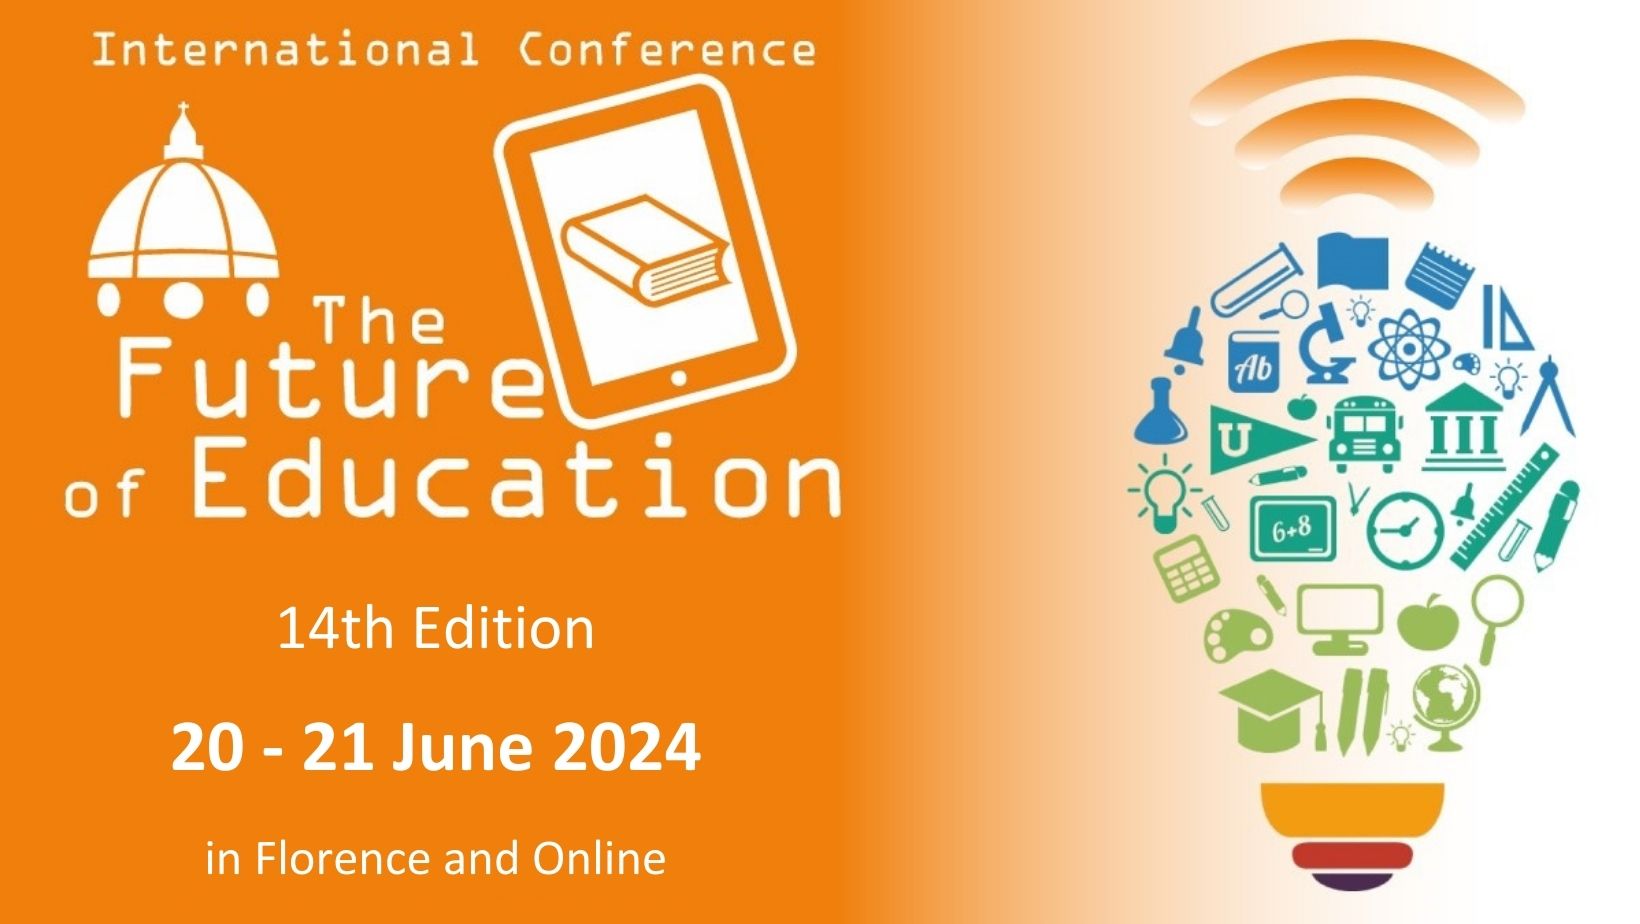 FOE 2024 | The Future of Education 14th Edition - International Conference, Florence, Toscana, Italy